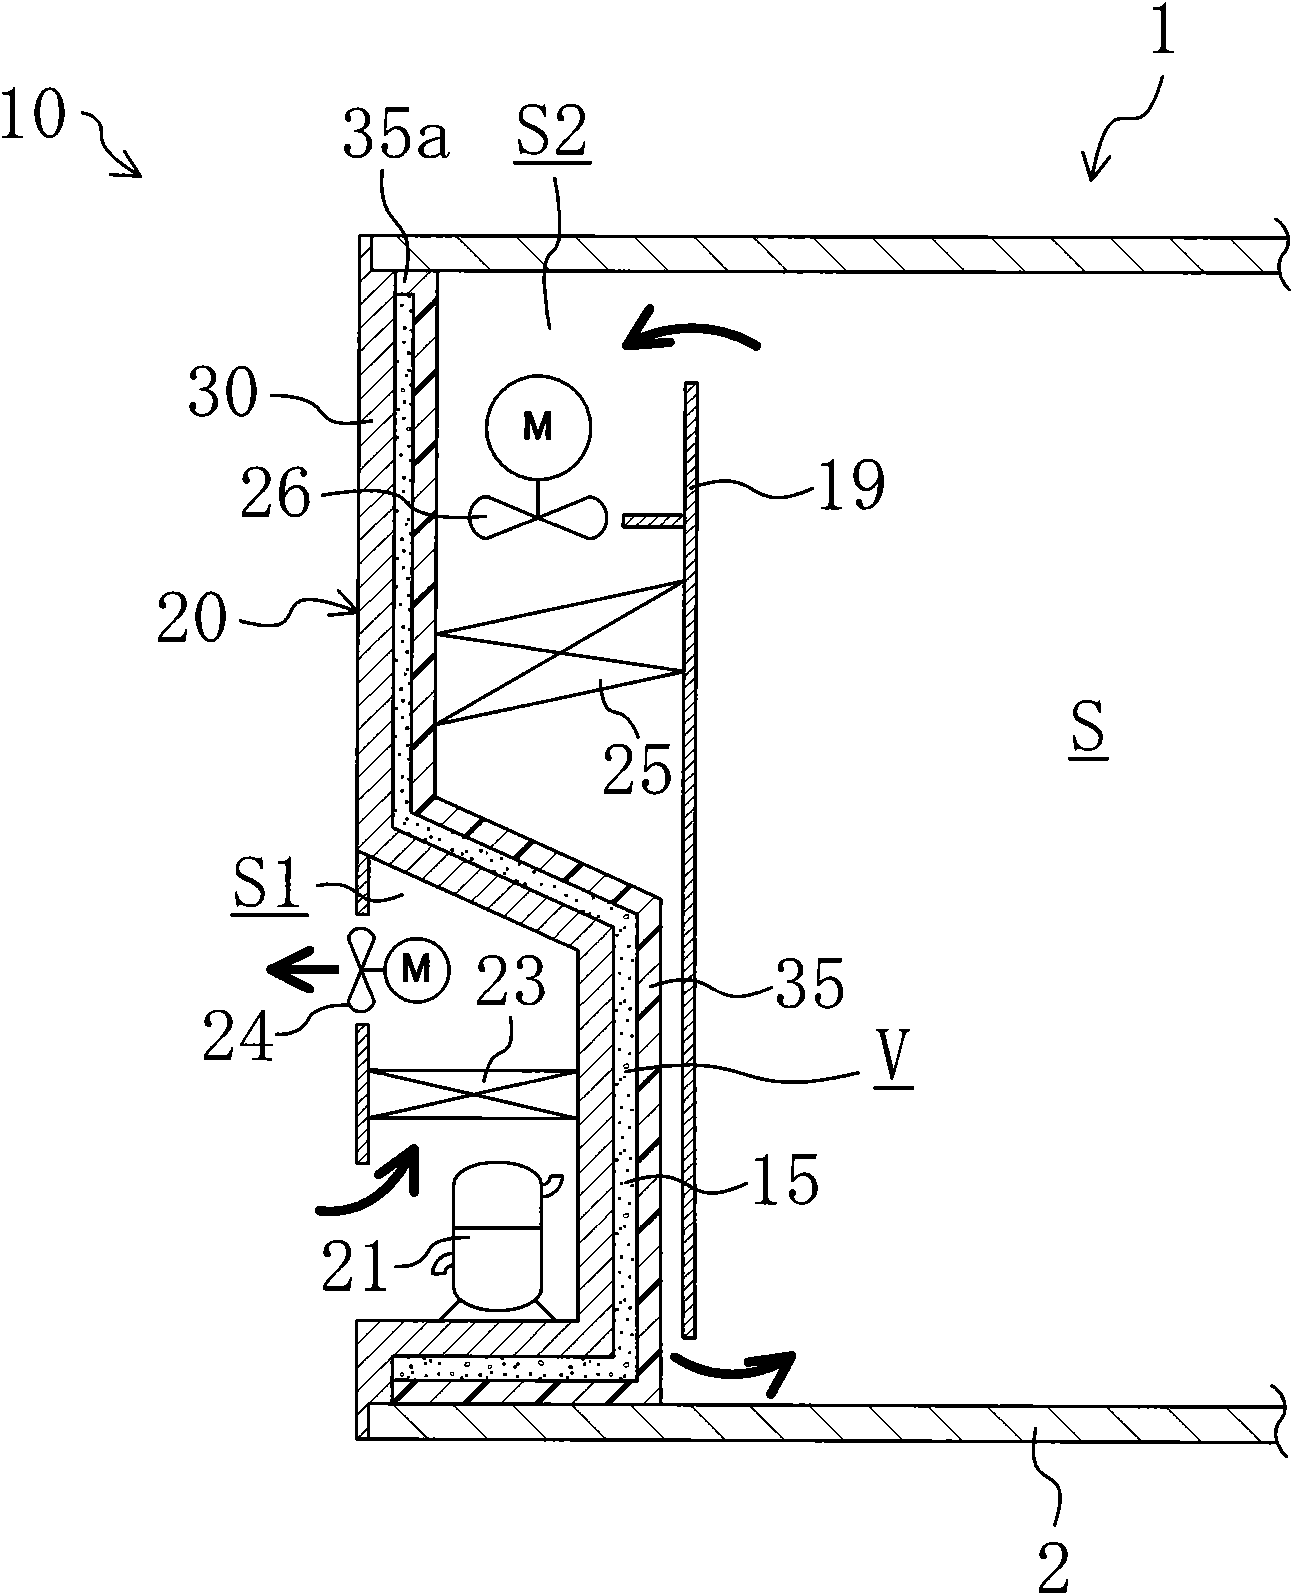 Casing structure of freezer for container and process for manufacturing the same